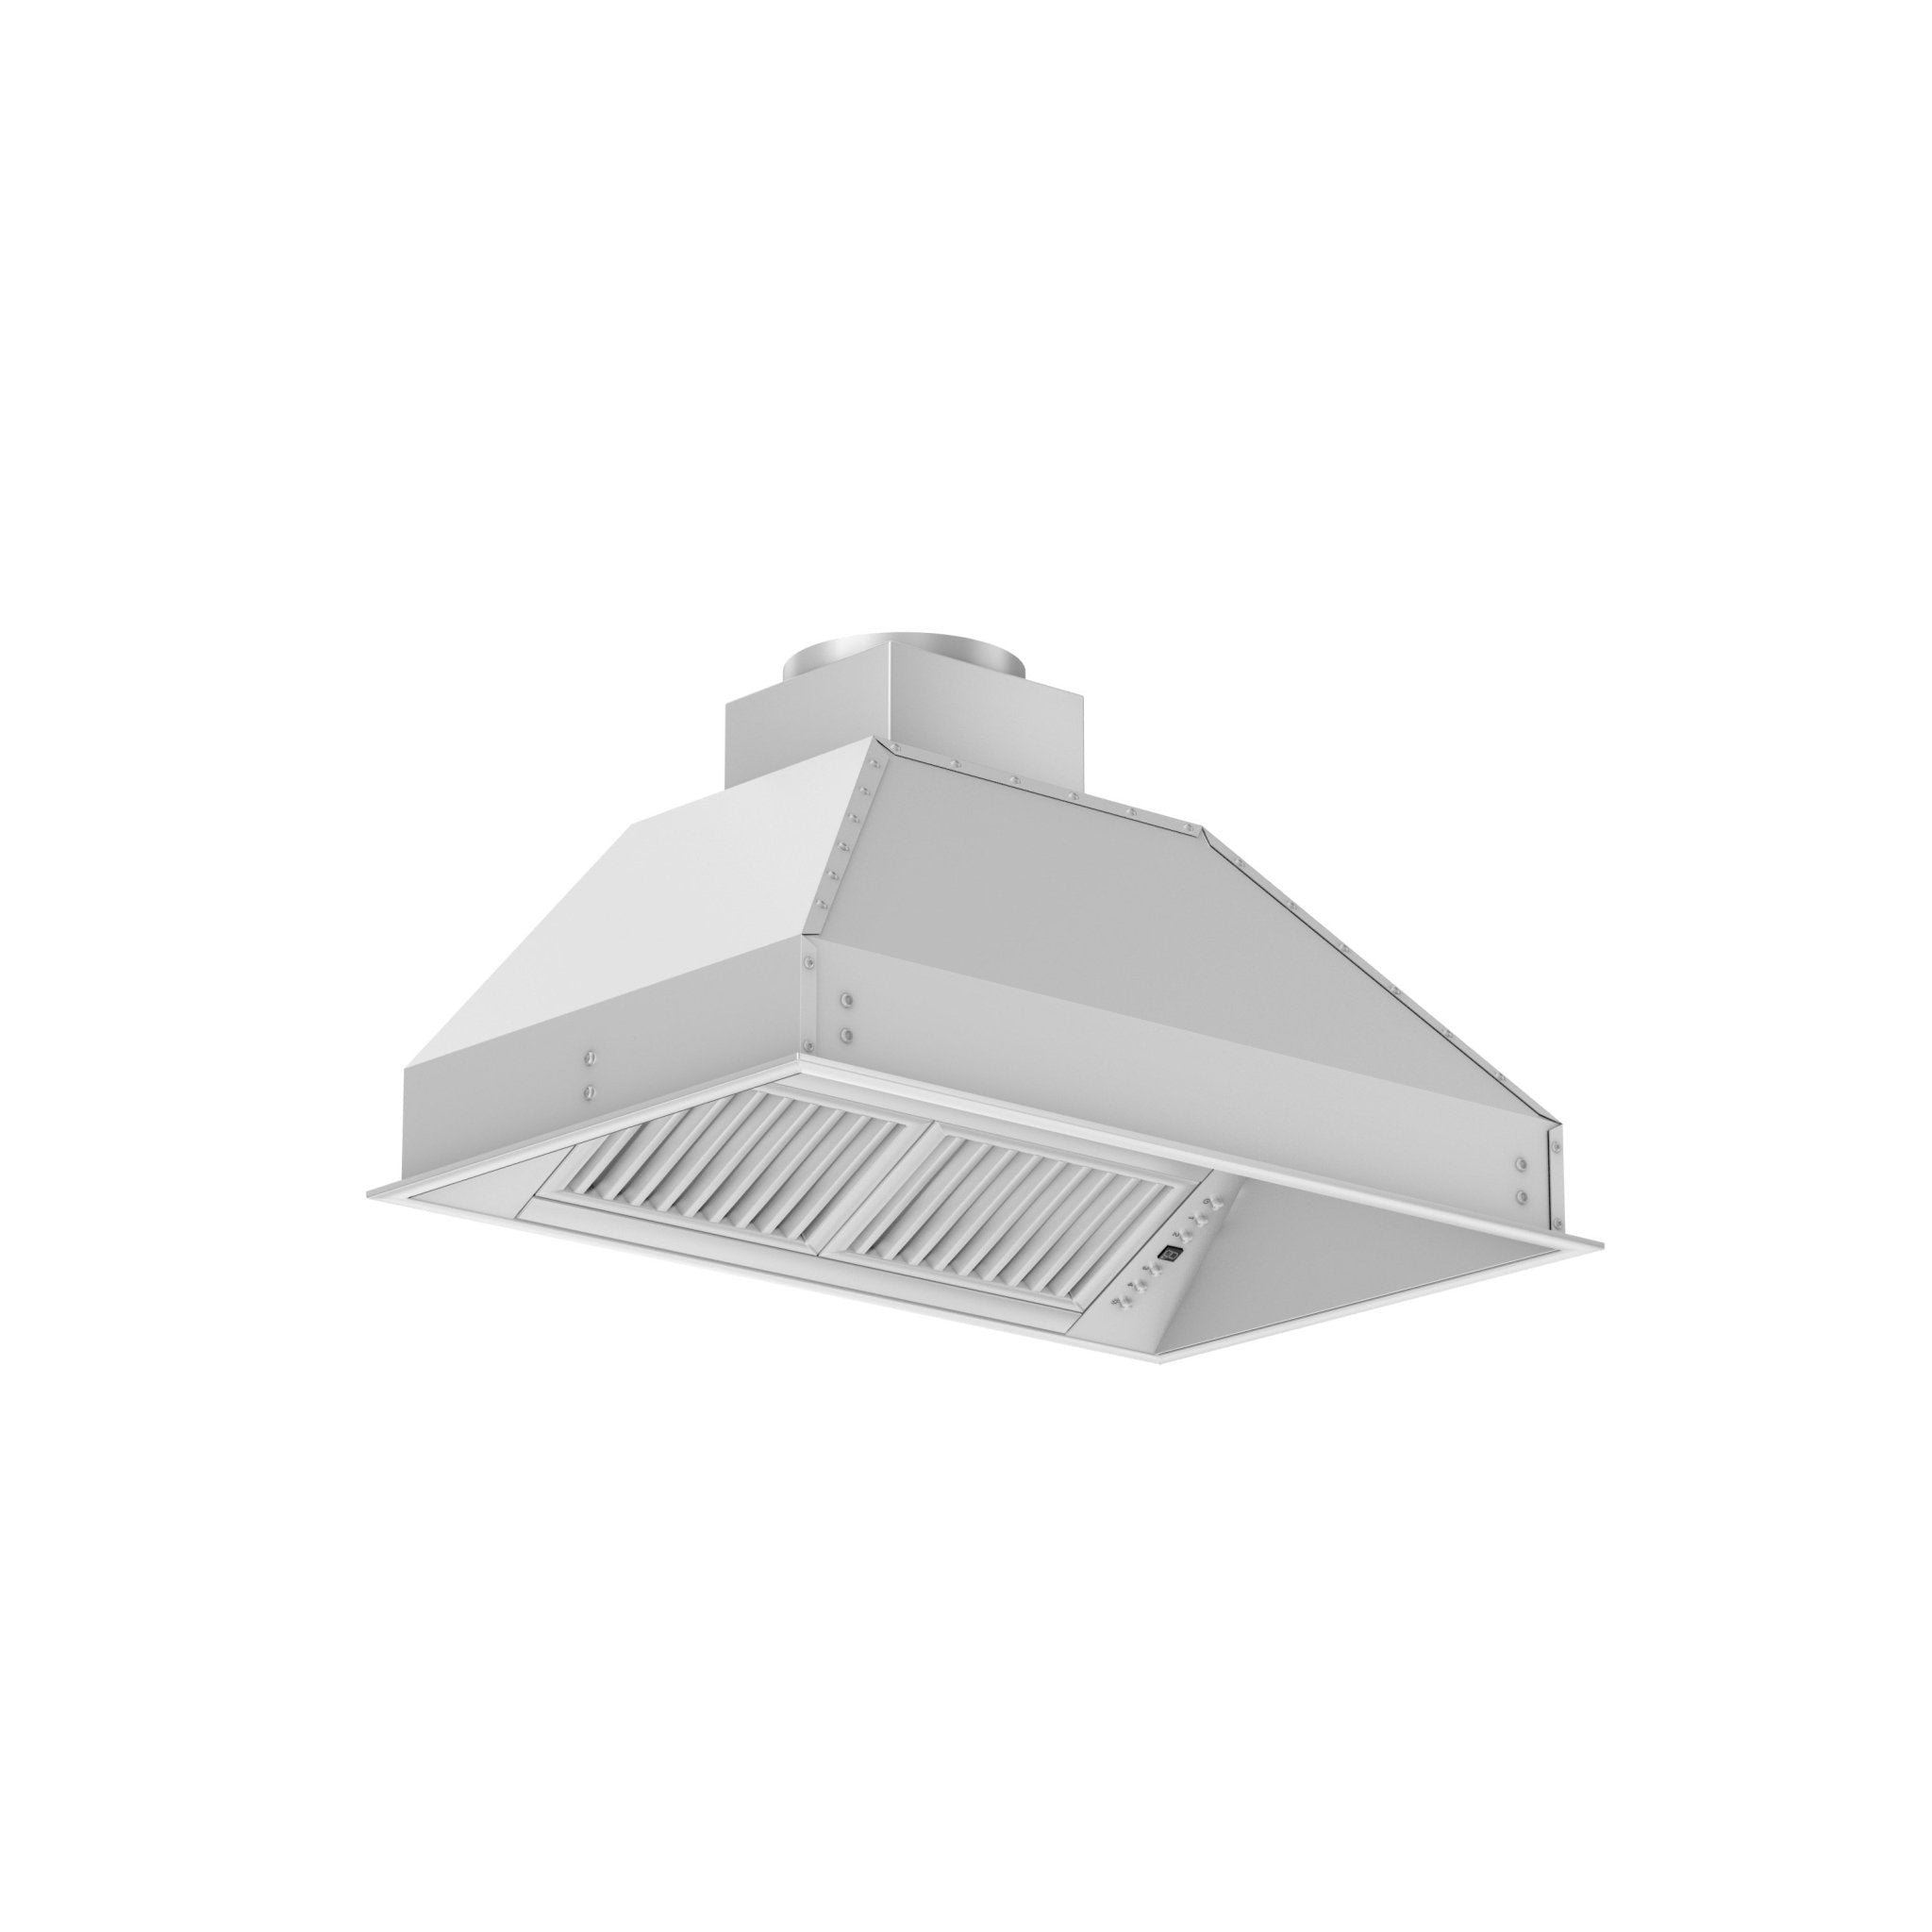 ZLINE Ducted Wall Mount Range Hood Insert in Outdoor Approved Stainless Steel (721-304) - New Star Living